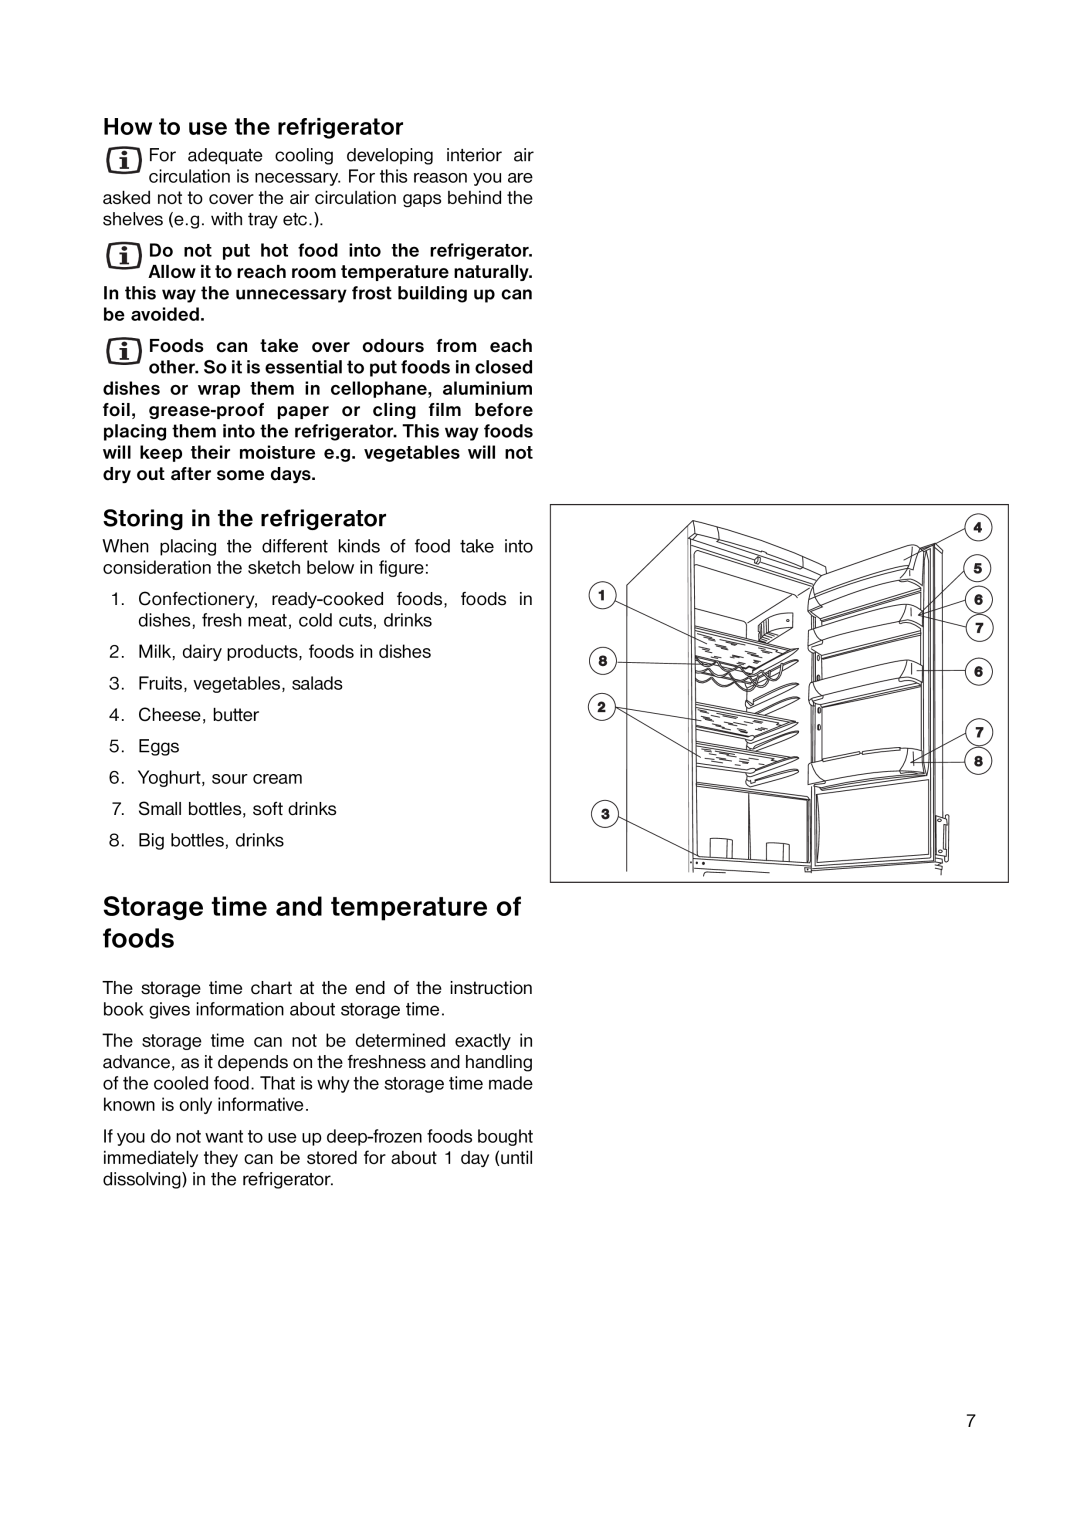 Zanussi ZERB 9043 manual Storage time and temperature of foods, How to use the refrigerator, Storing in the refrigerator 